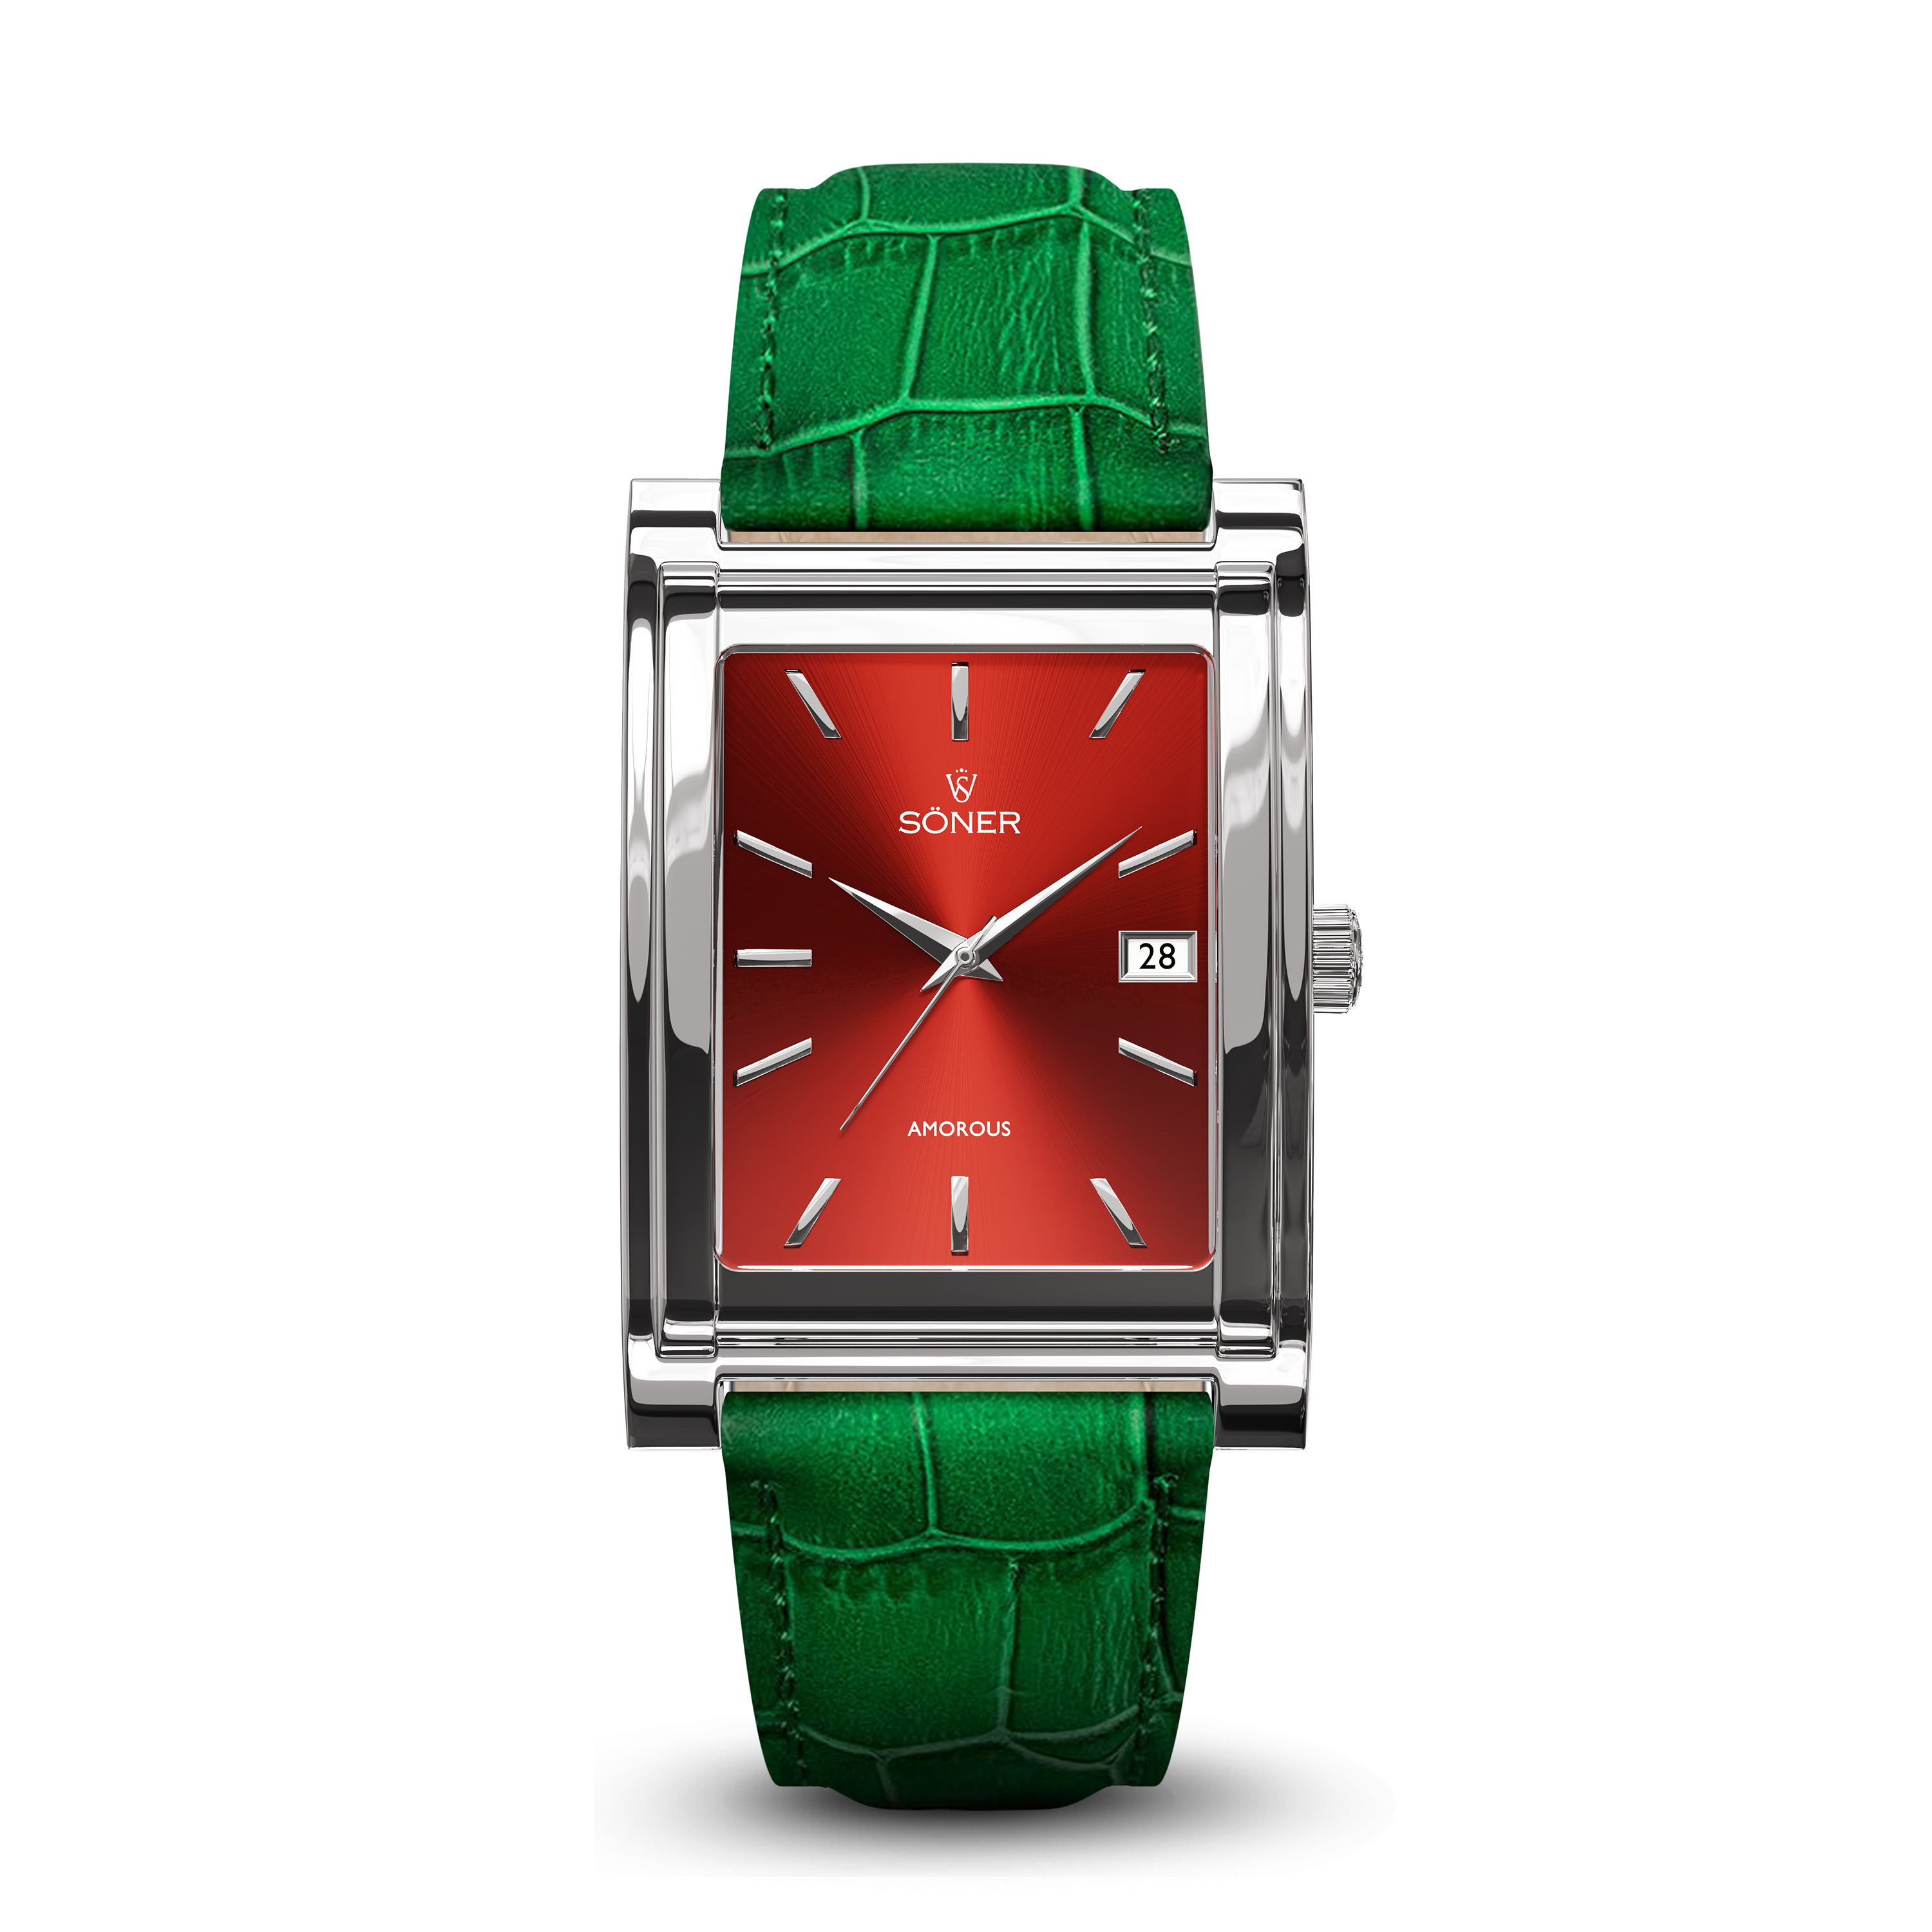 Square automatic watch, Amorous Rio with red dial - green alligator pattern leather strap front view